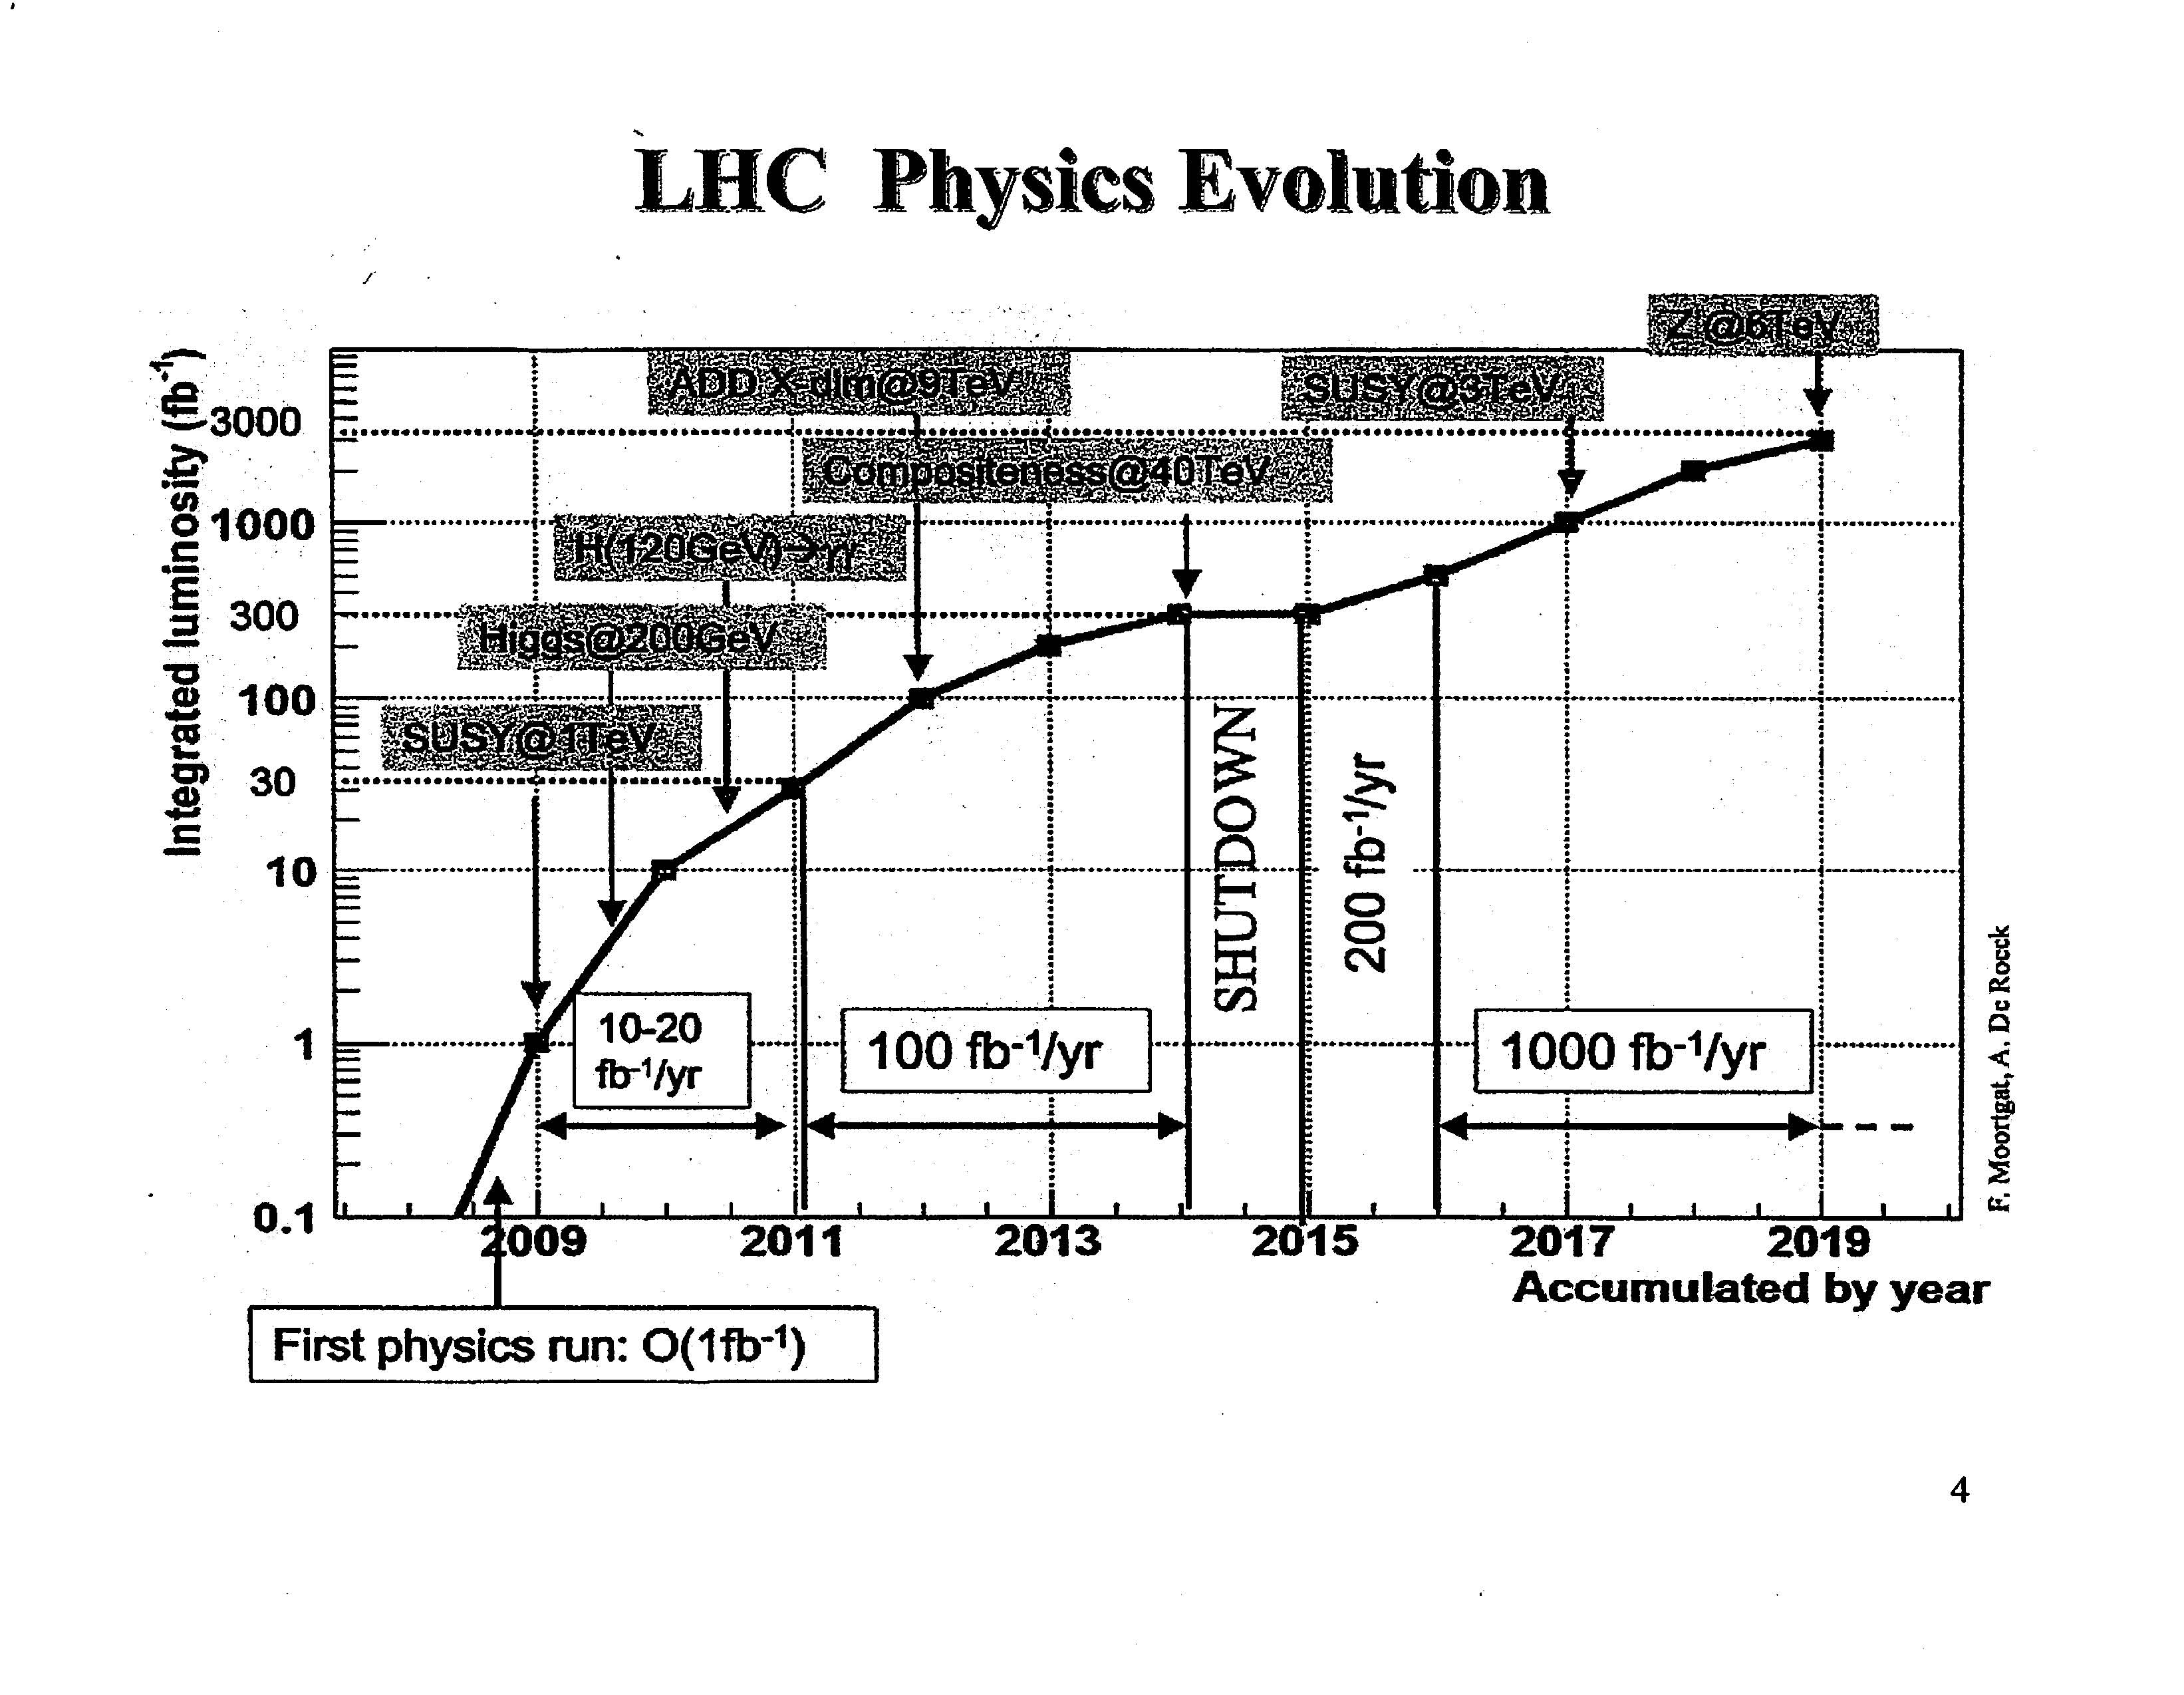 Timeline for possible LHC discoveries